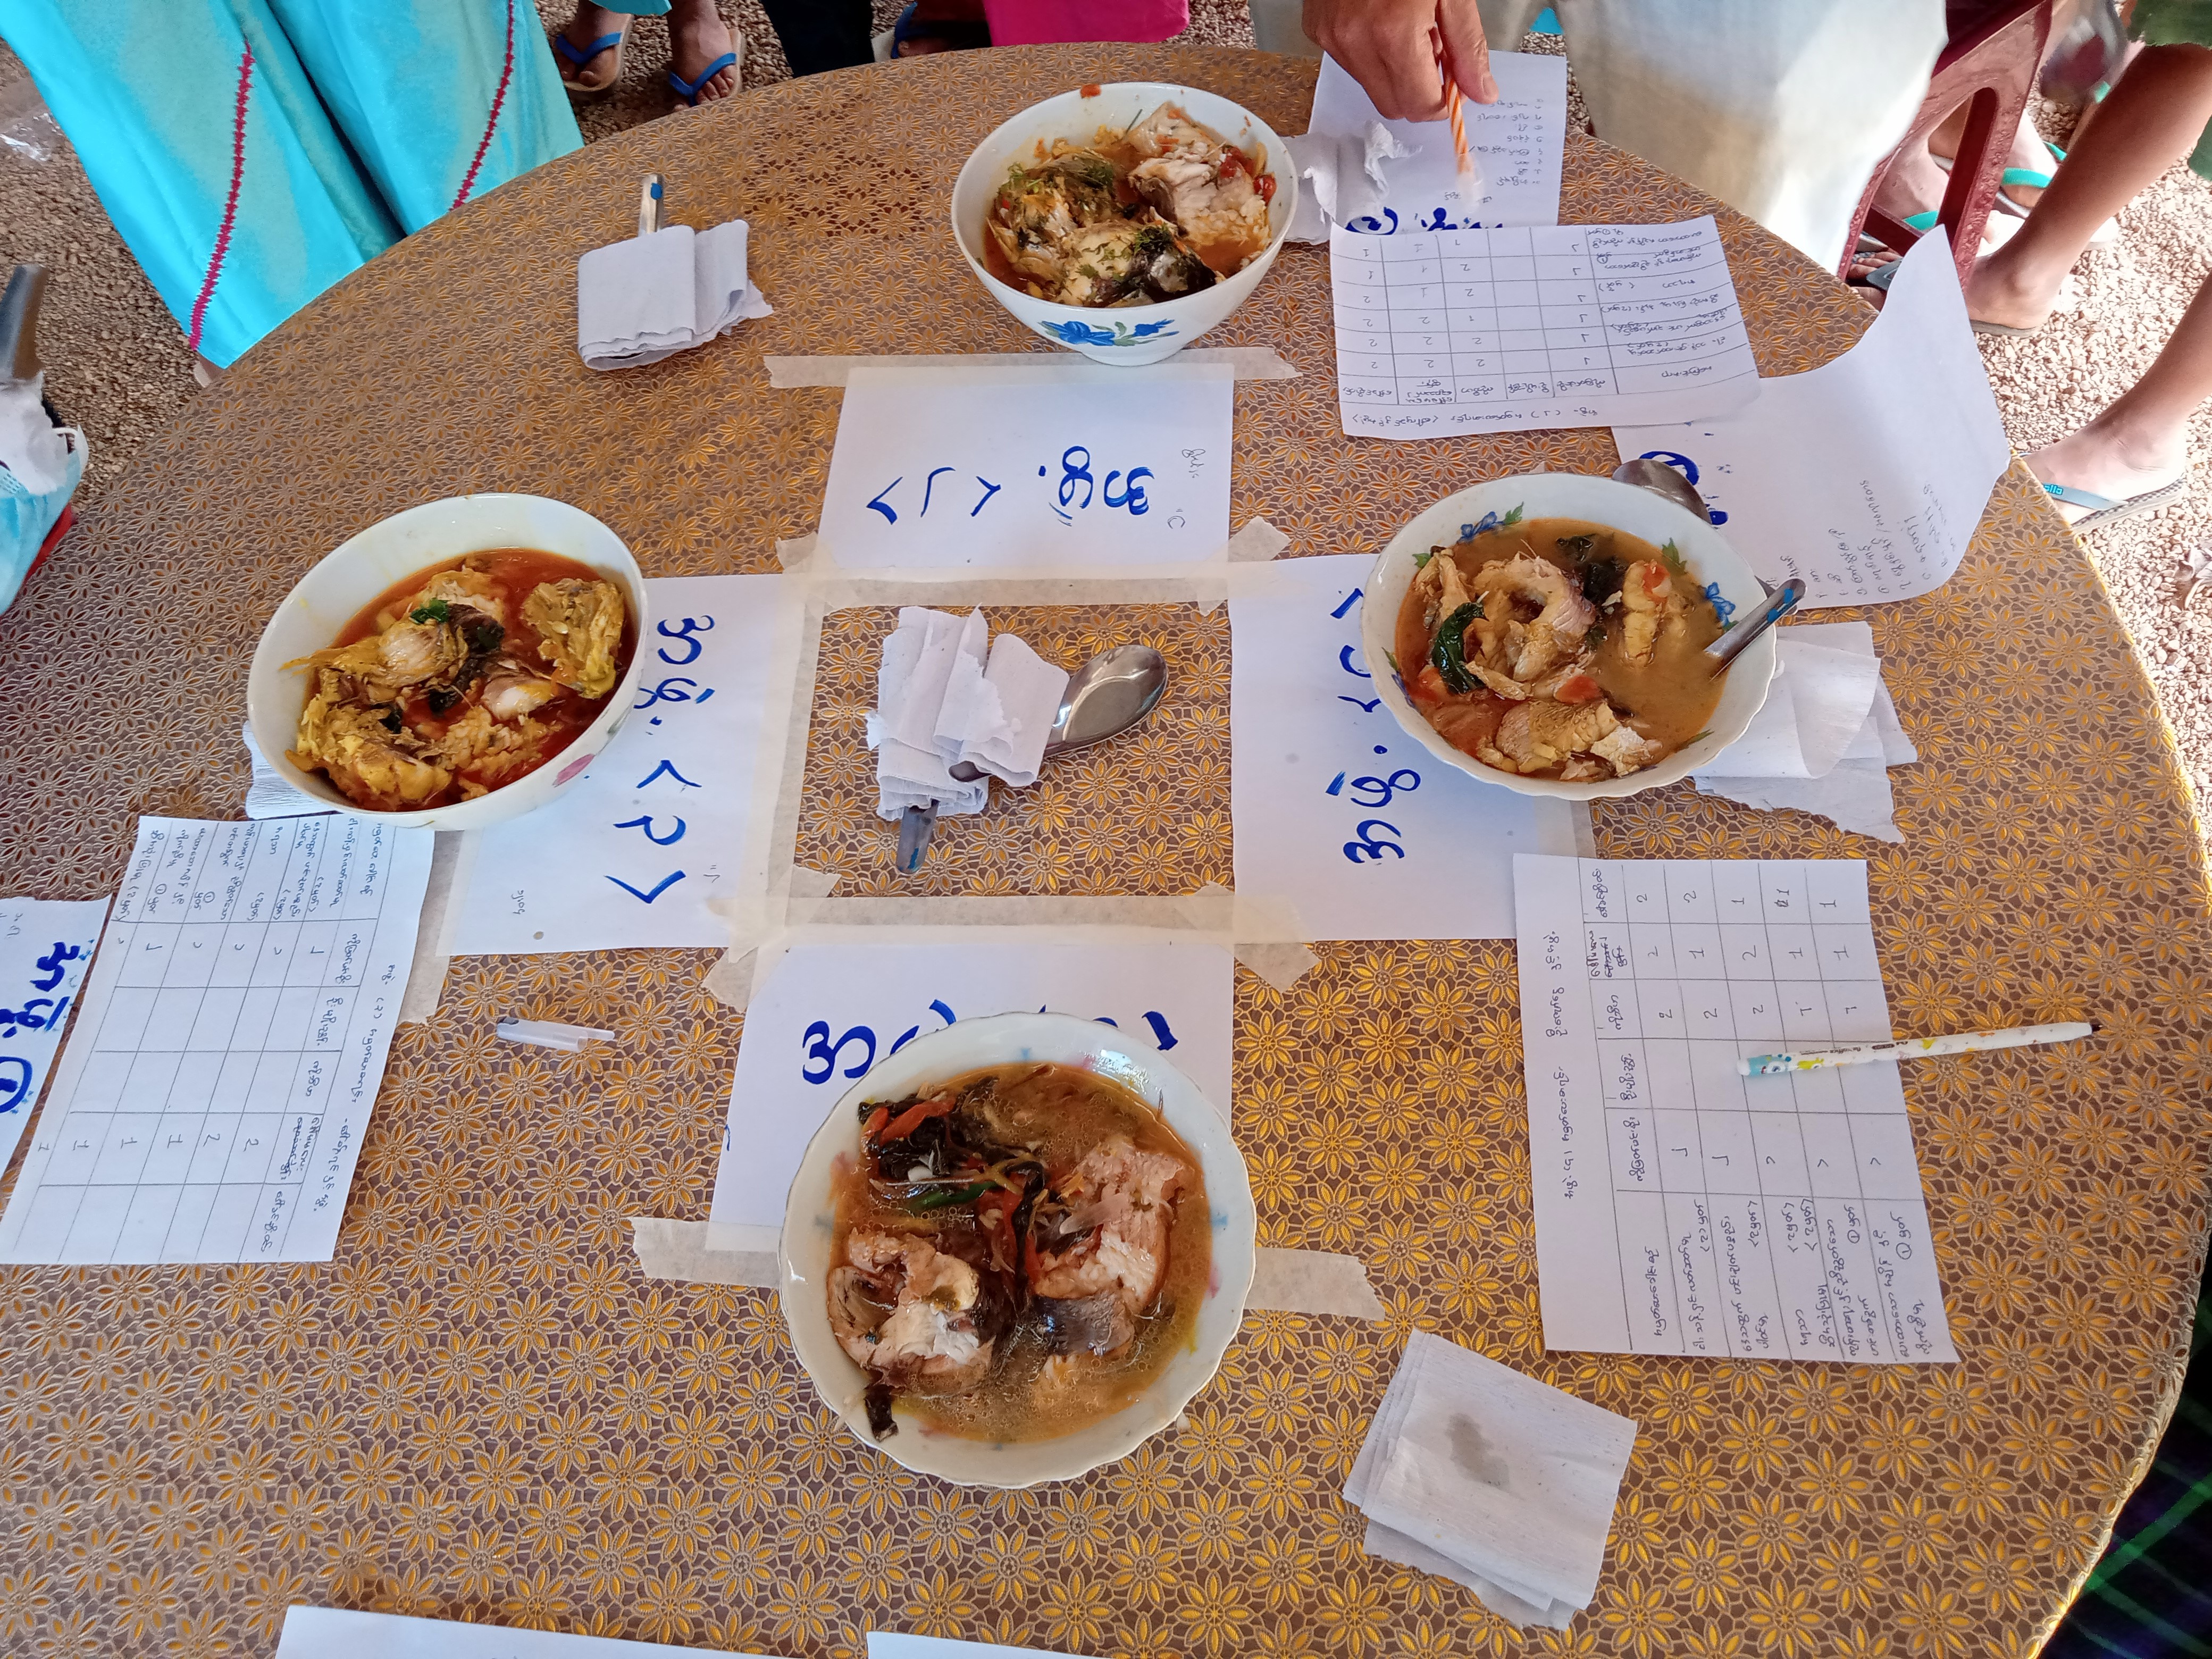  Judging the prepared fish curry dishes. Photo by Ma Thu Zar Win.  